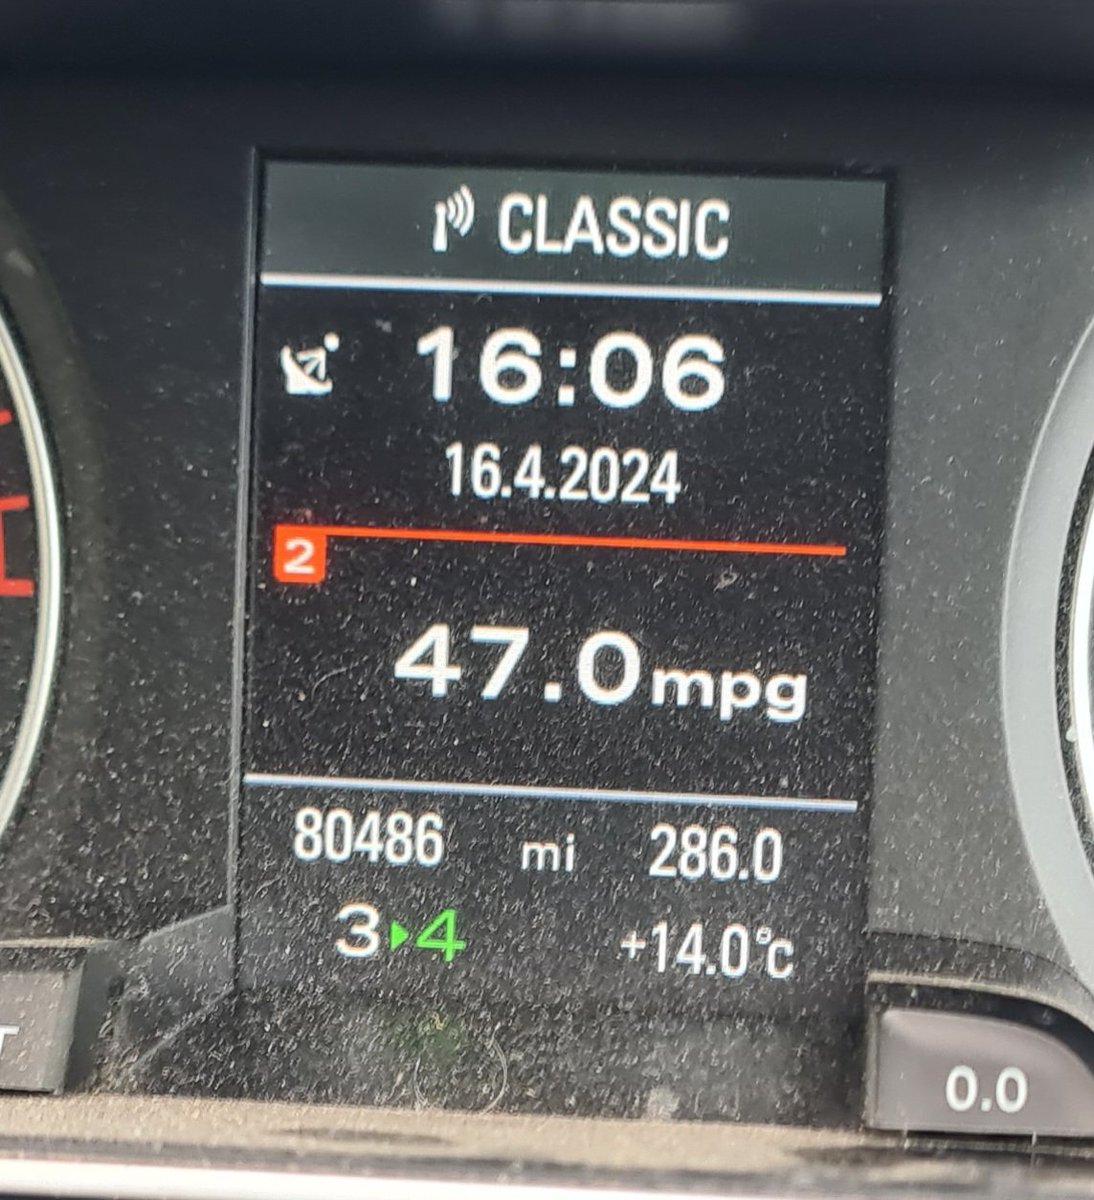 My cars odometer is giving a nod to some classic intel CPU